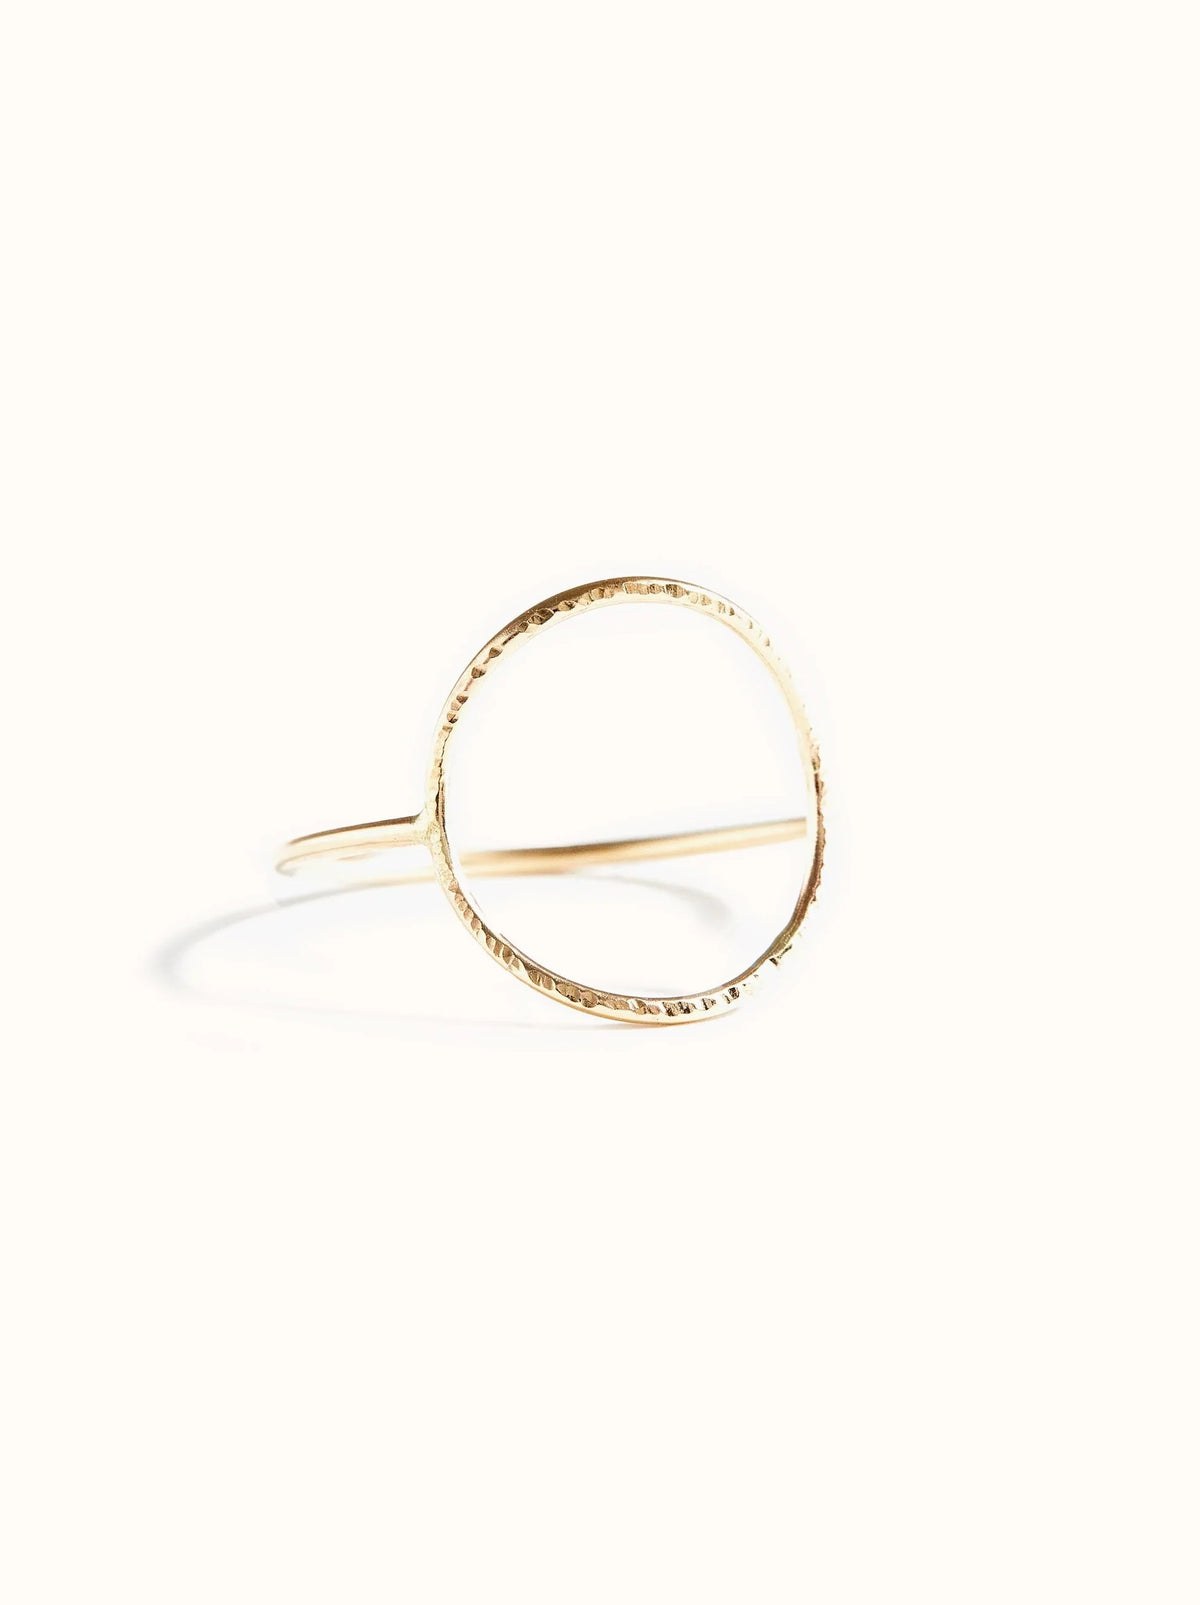 ABLE circle ring in 14k gold fill